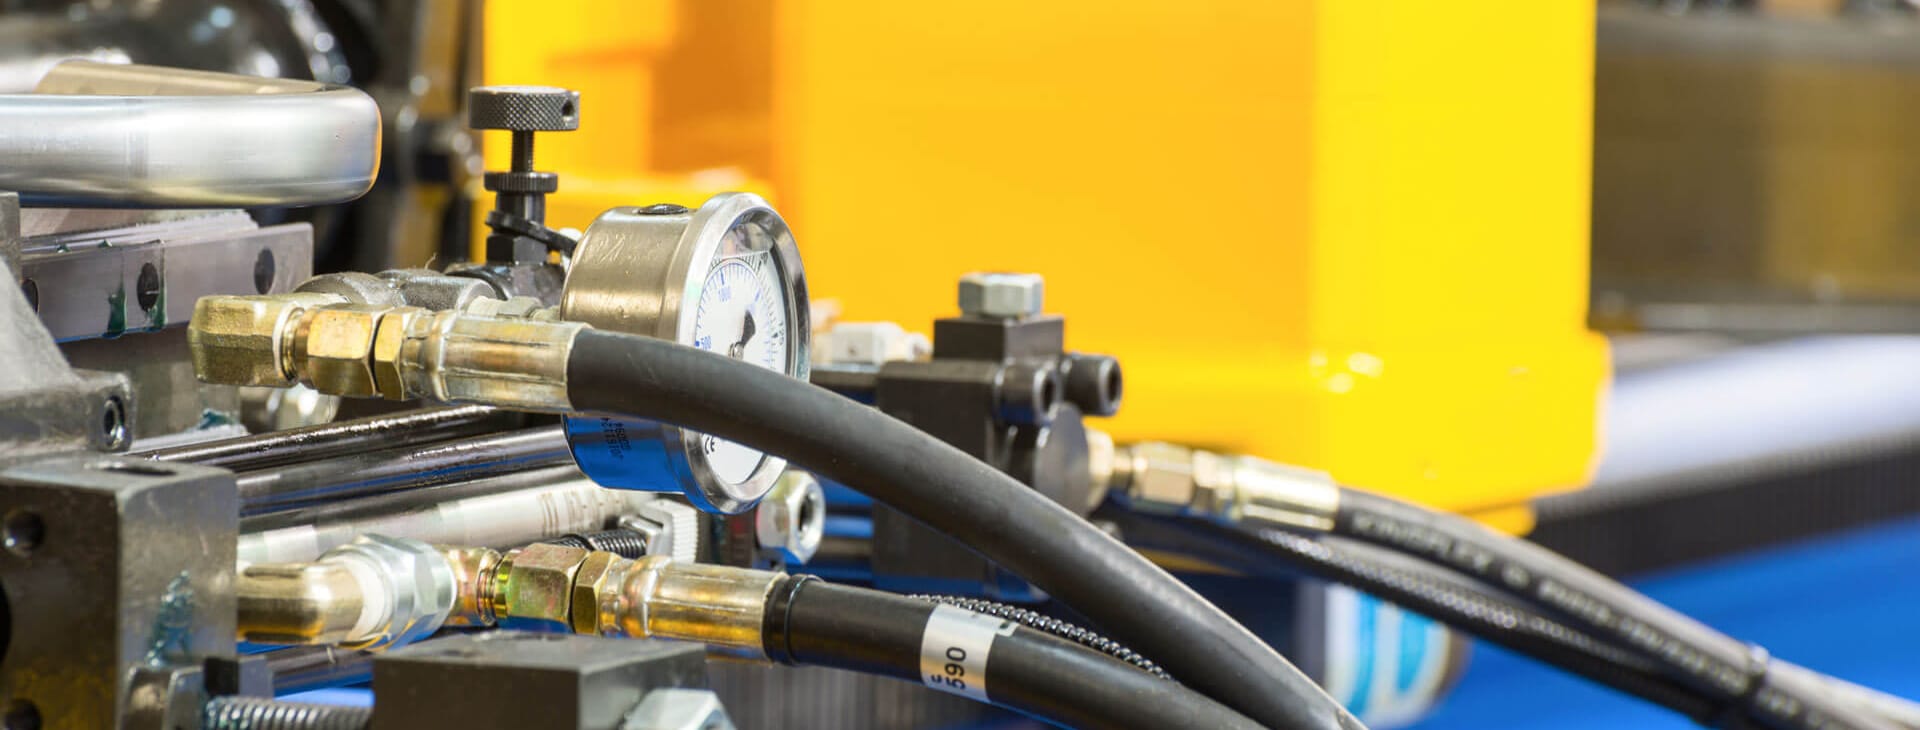 industrial tubing shown attached to a yellow and blue machine